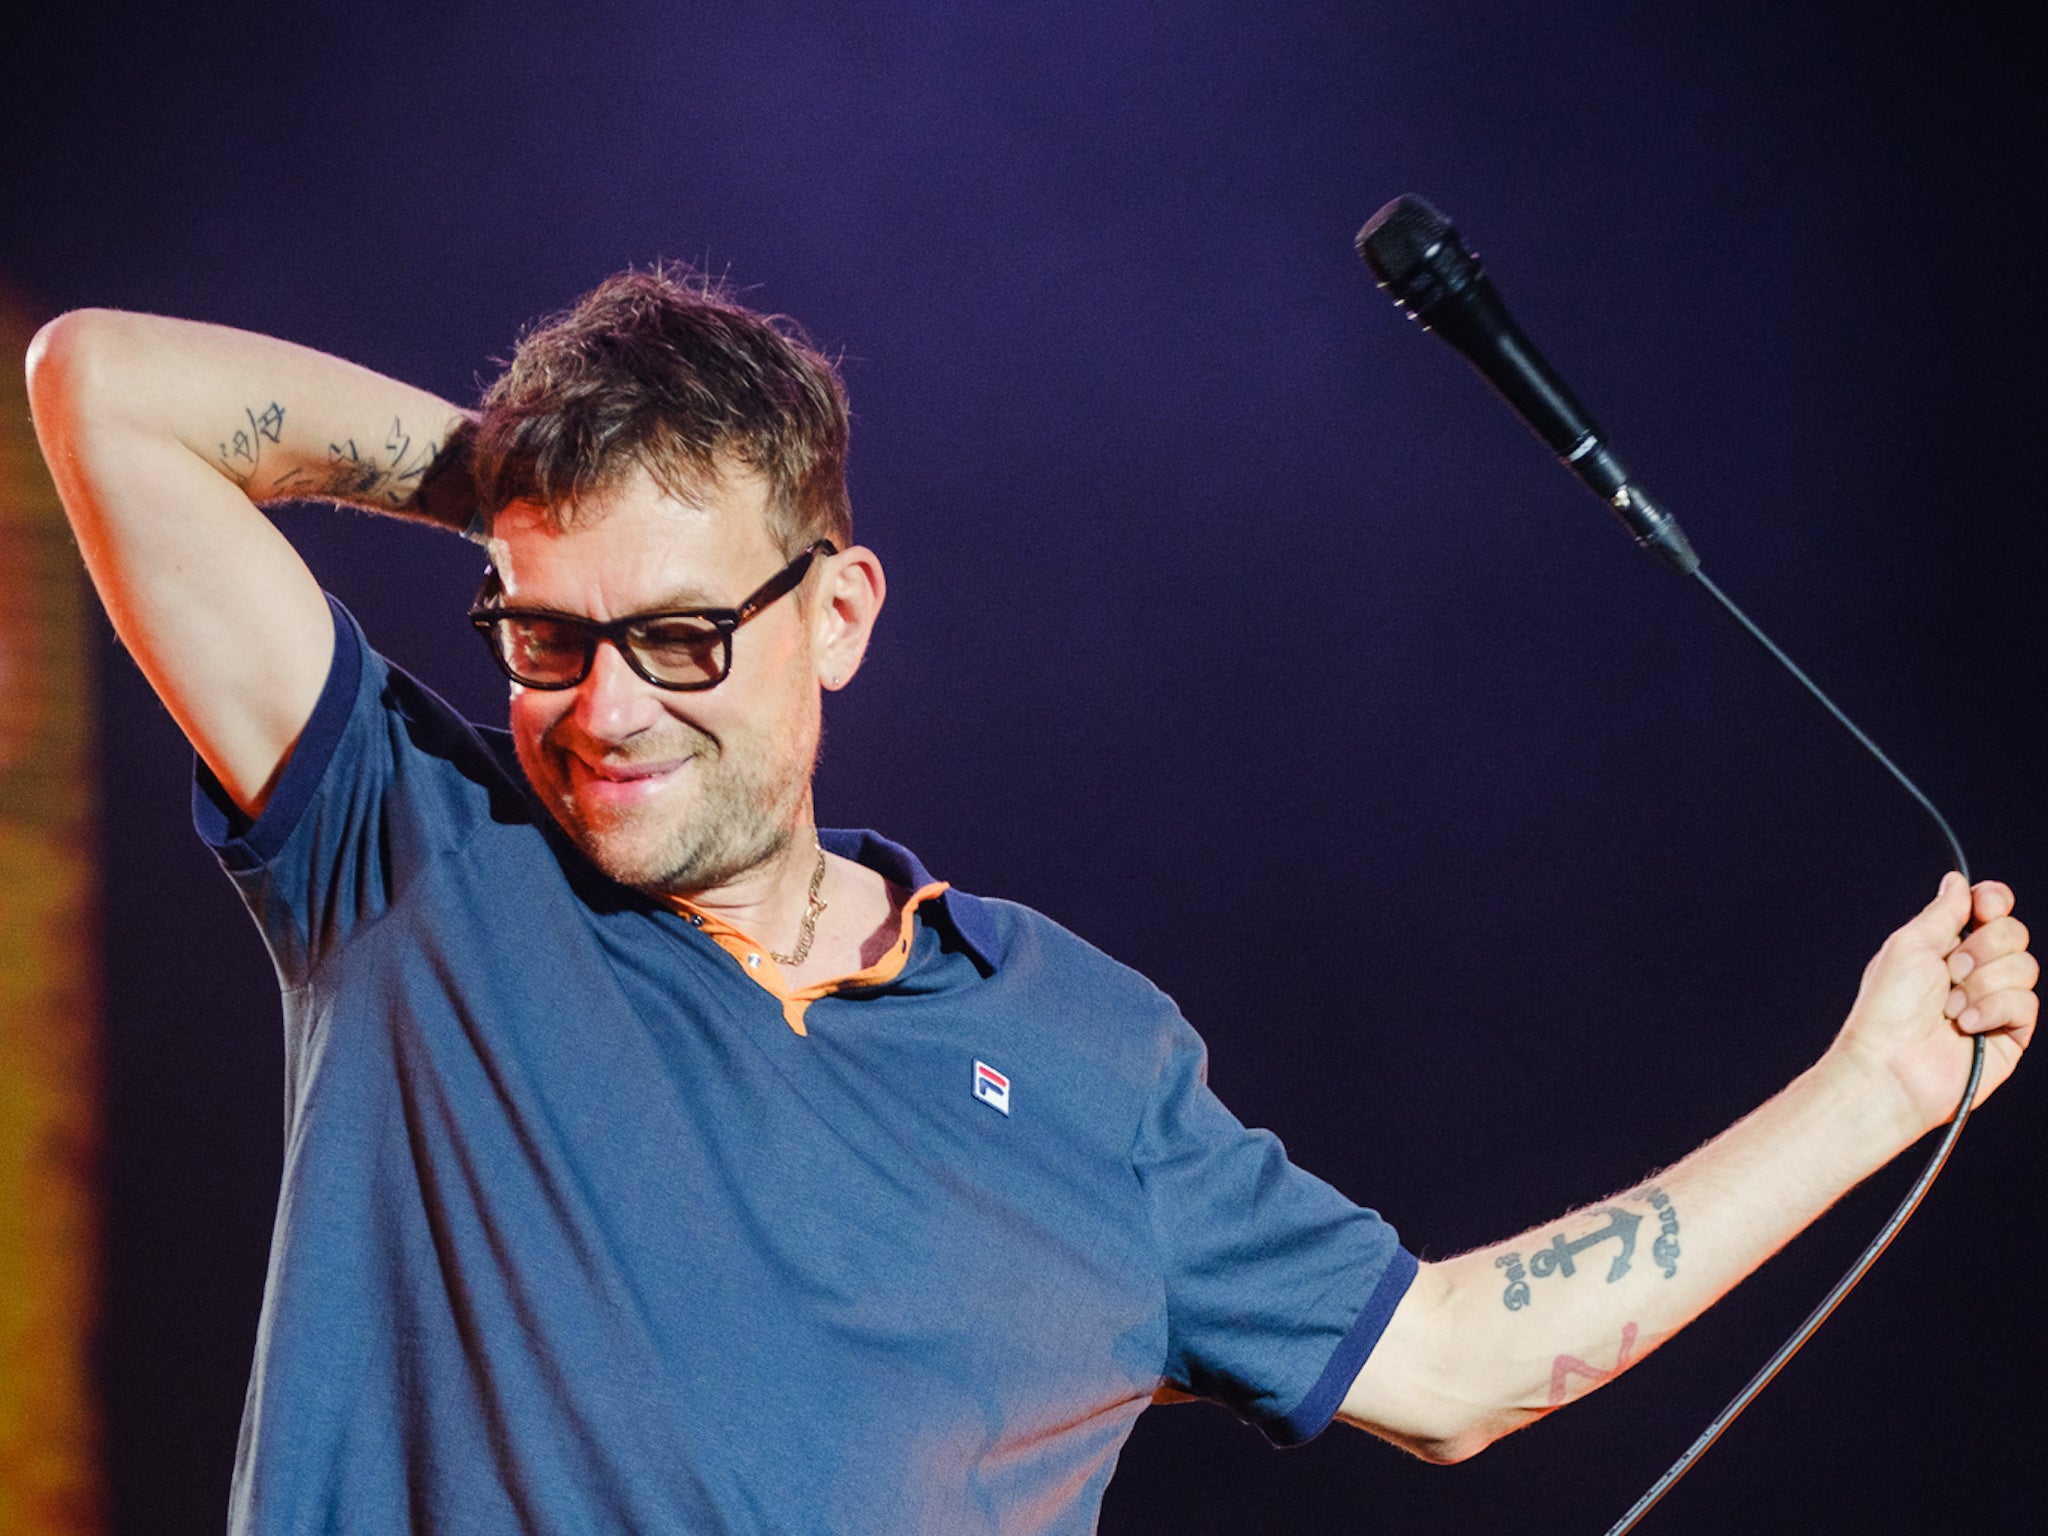 Blur’s Damon Albarn does his best to bring some energy back into the arena after a downpour